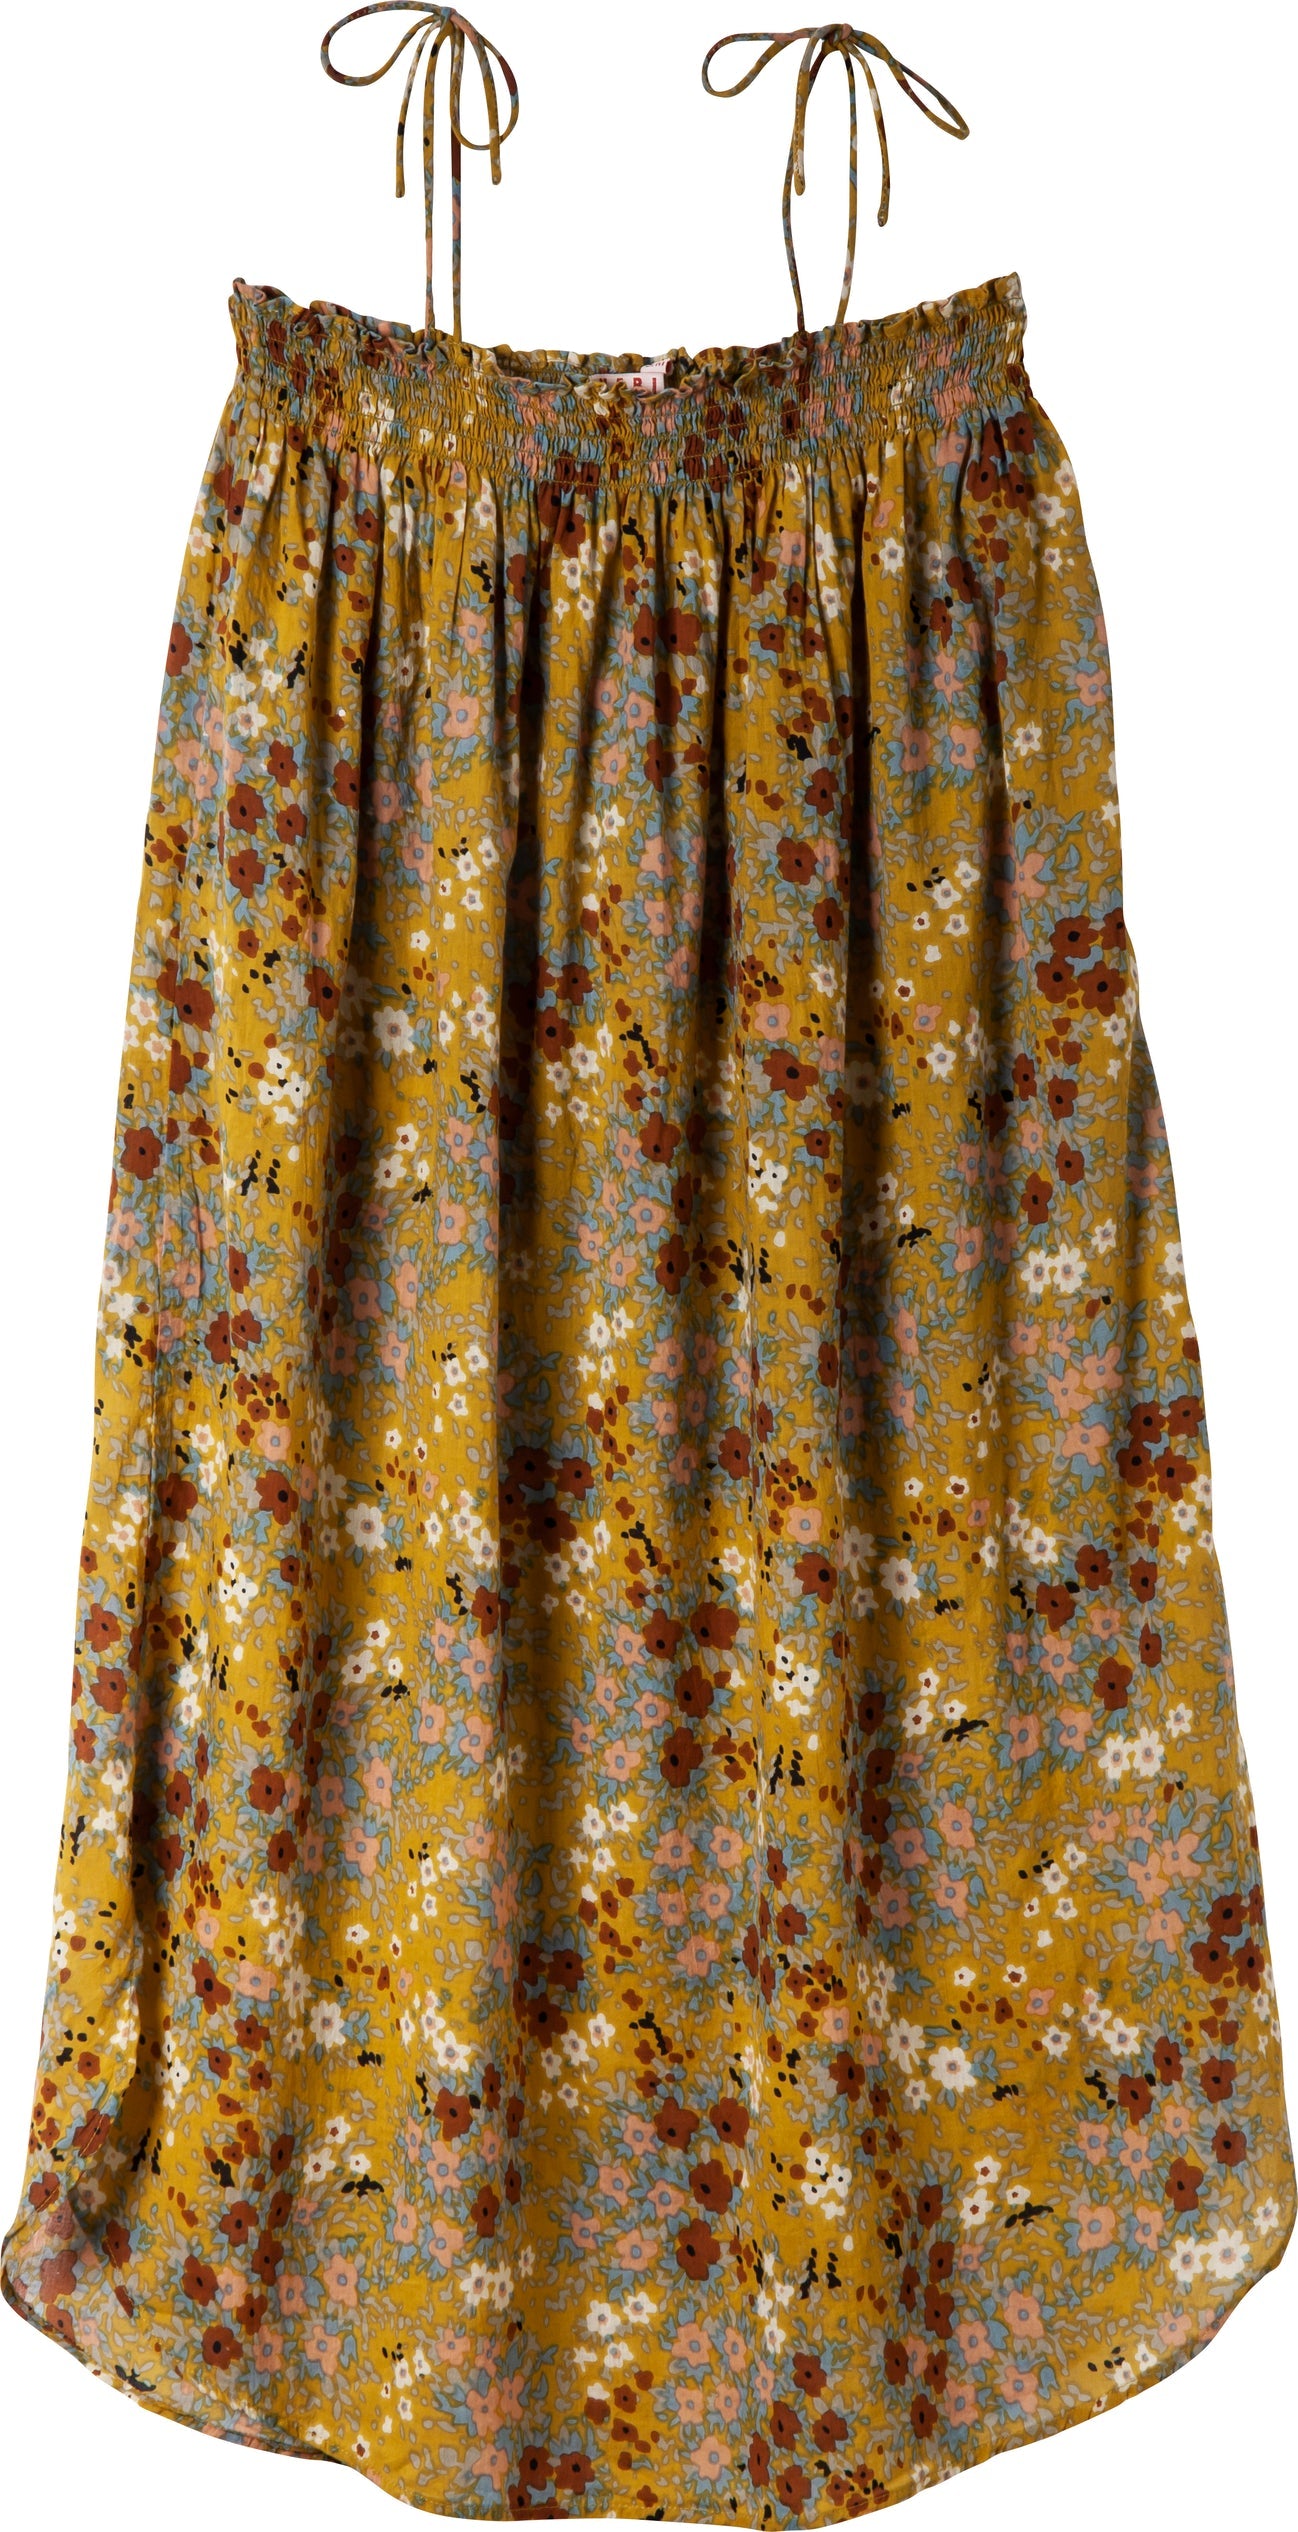 dress with flower pattern